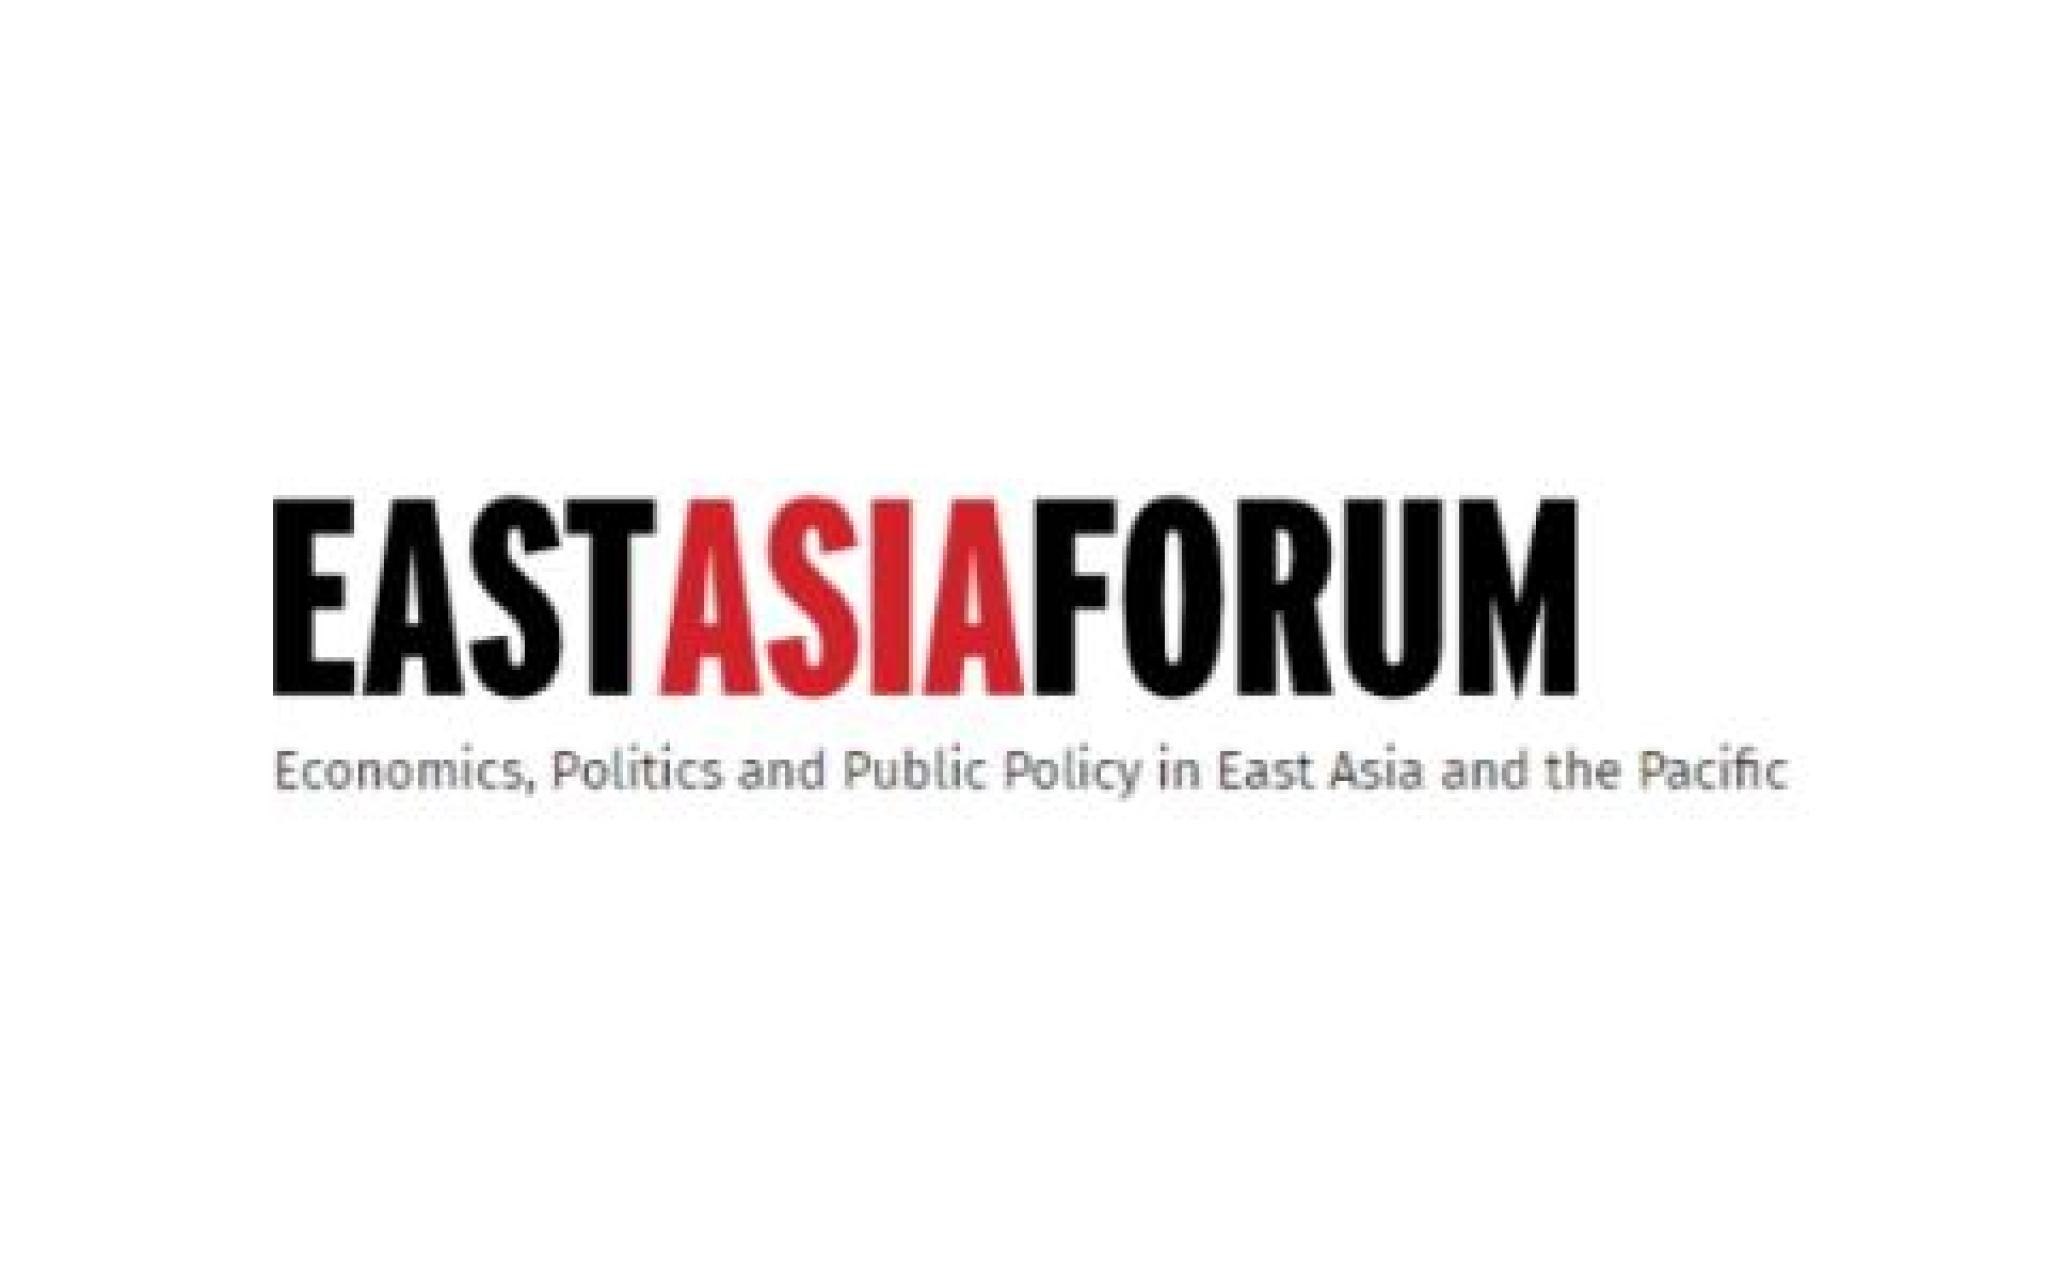 East Asia Forum banner - Economics, Politics and Public Policy in East Asia and the Pacific